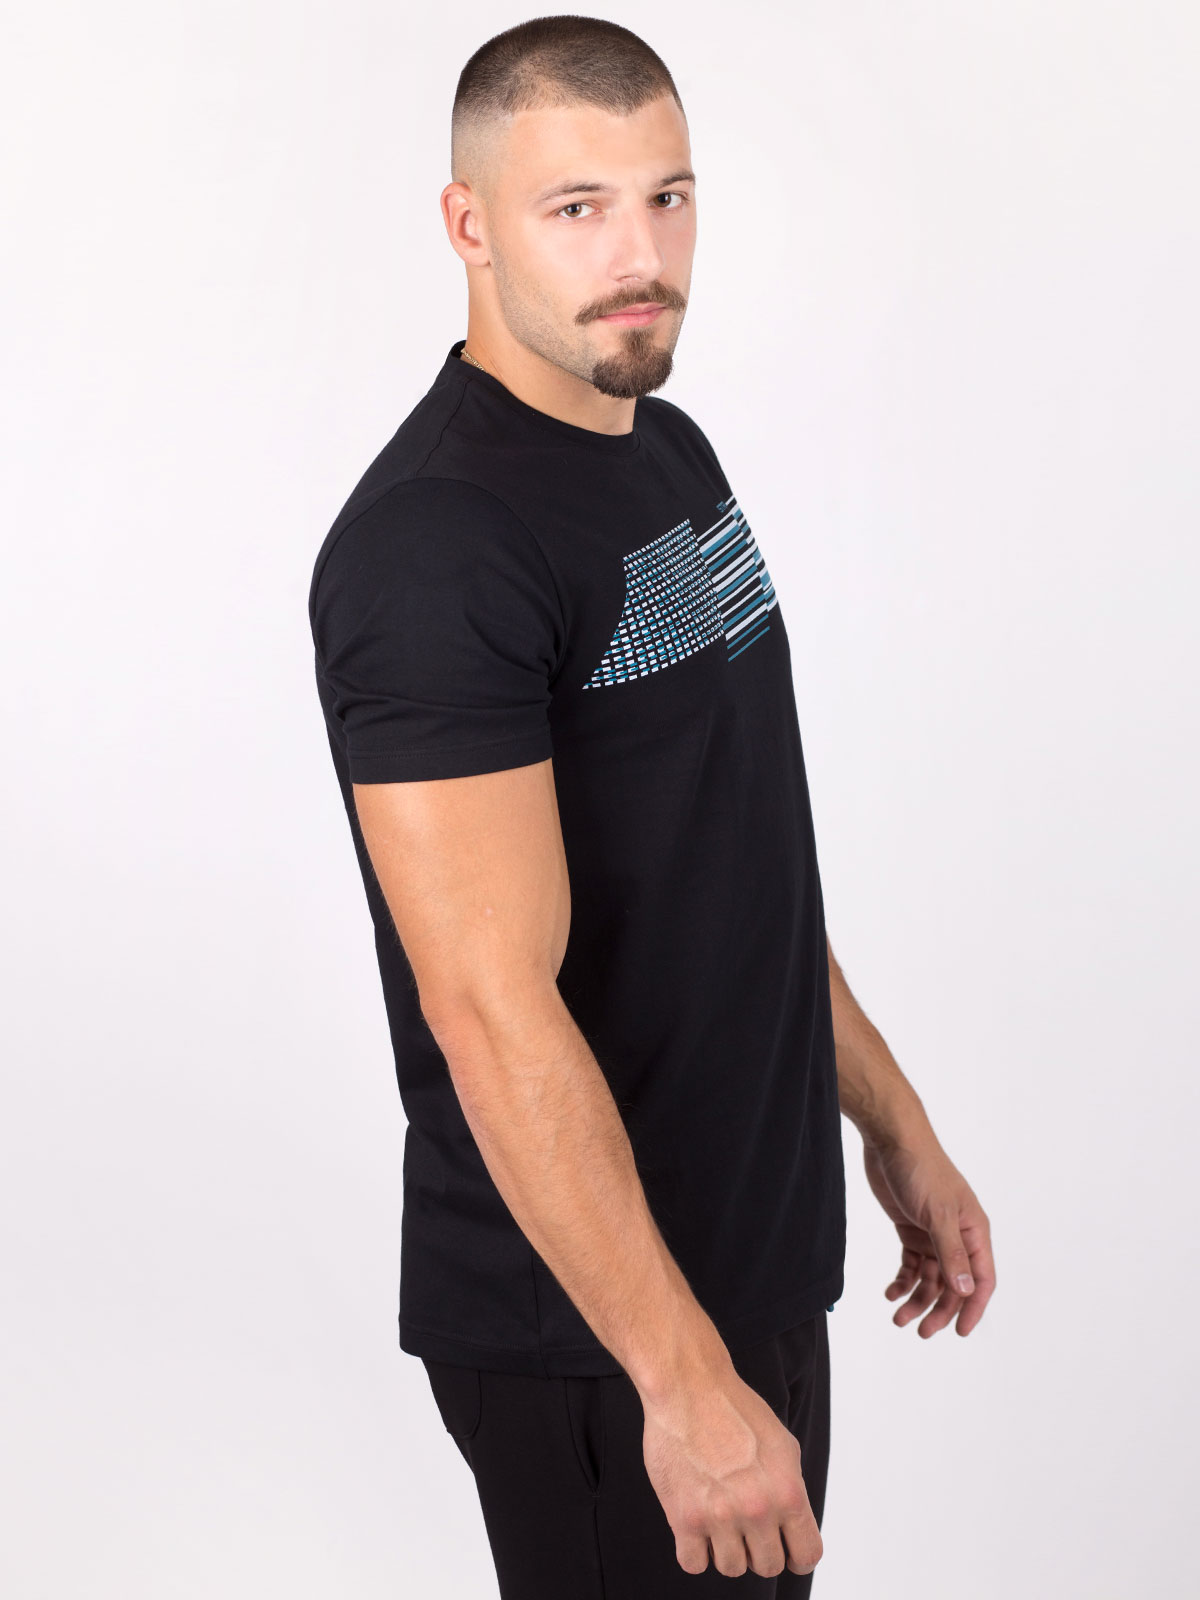 Tshirt in black with a print in white a - 96443 € 23.62 img2